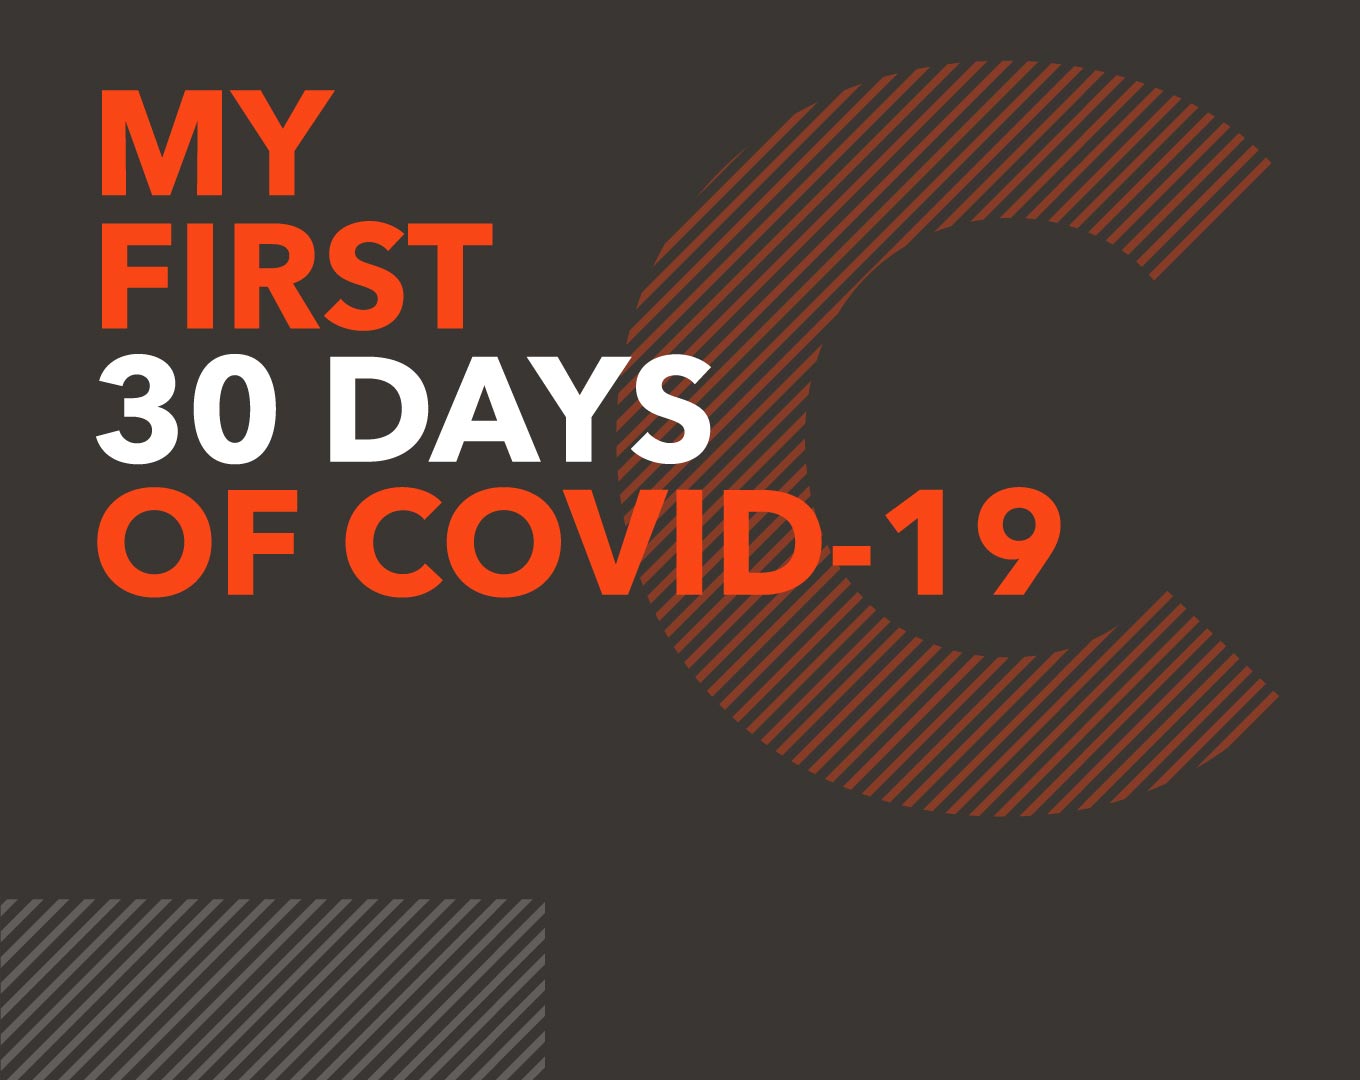 My first 30 days of COVID-19